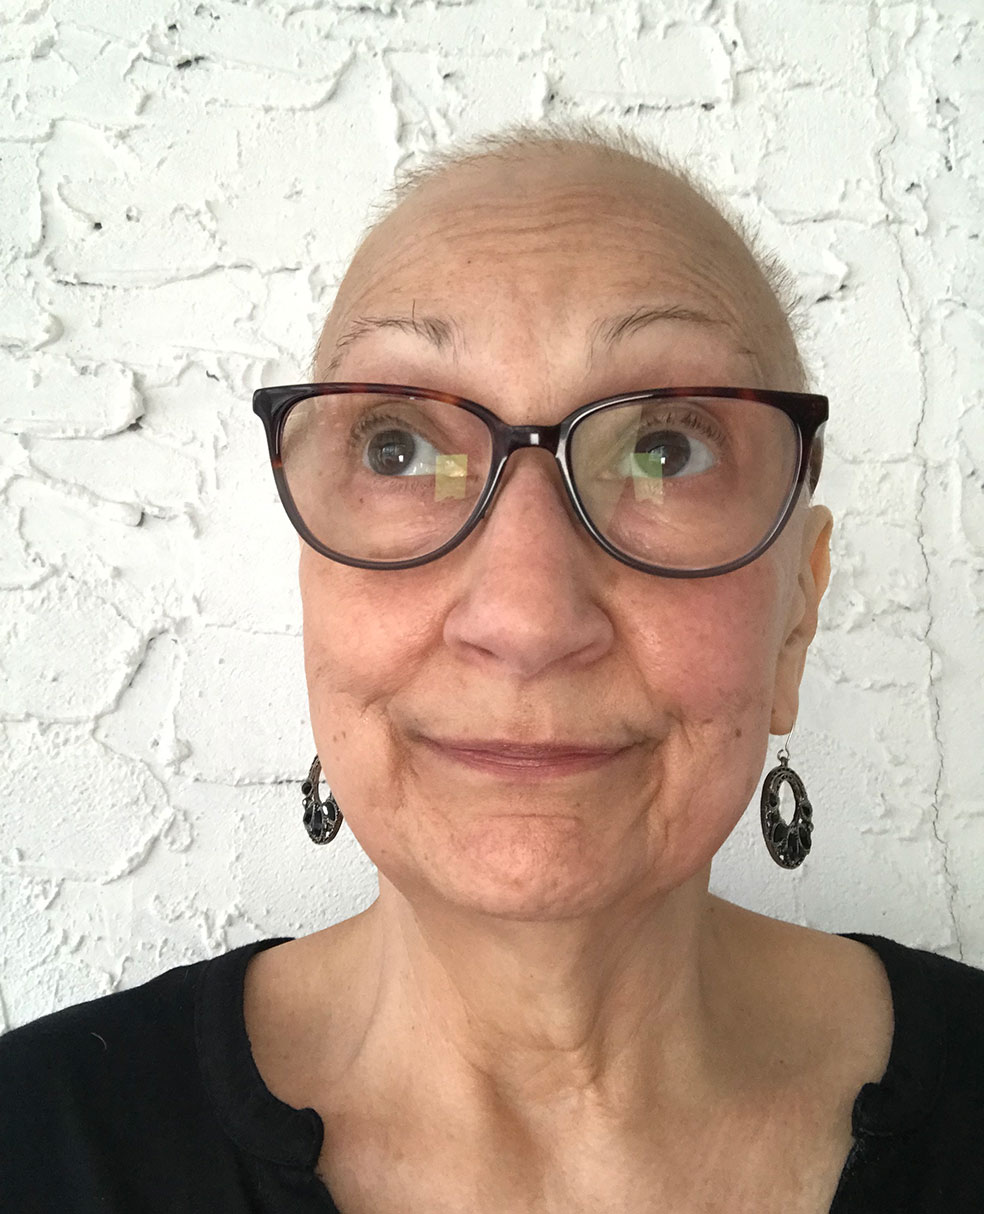 Claire, an older white woman with closely cropped hair and large glasses